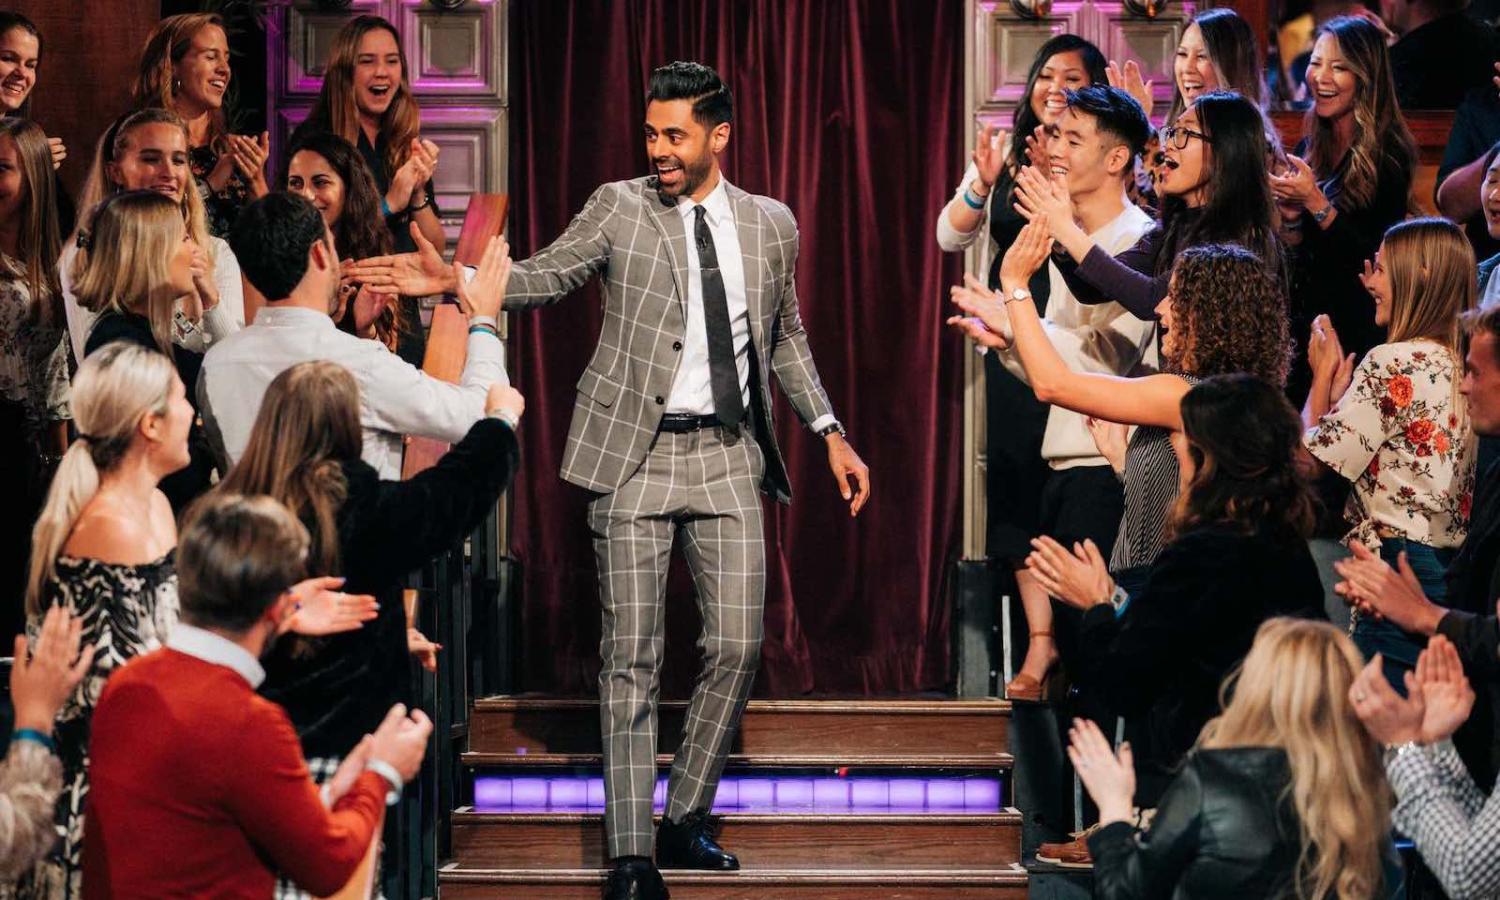 Hasan Minhaj speaks predominantly to his Asian-American millennial audience (Photo: Terence Patrick/CBS via Getty Images)